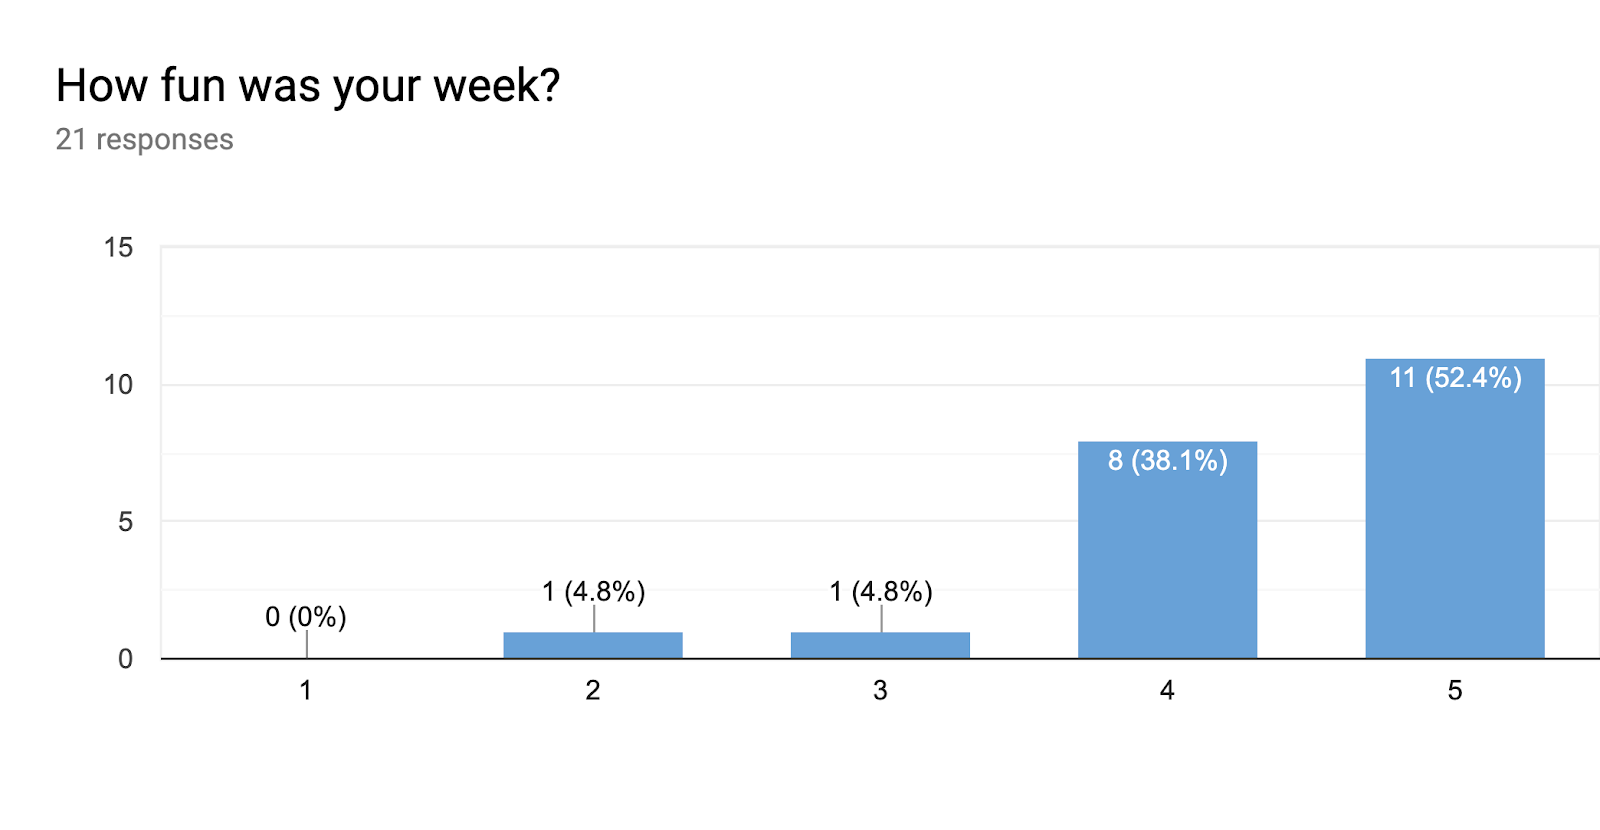 Forms response chart. Question title: How fun was your week?. Number of responses: 21 responses.